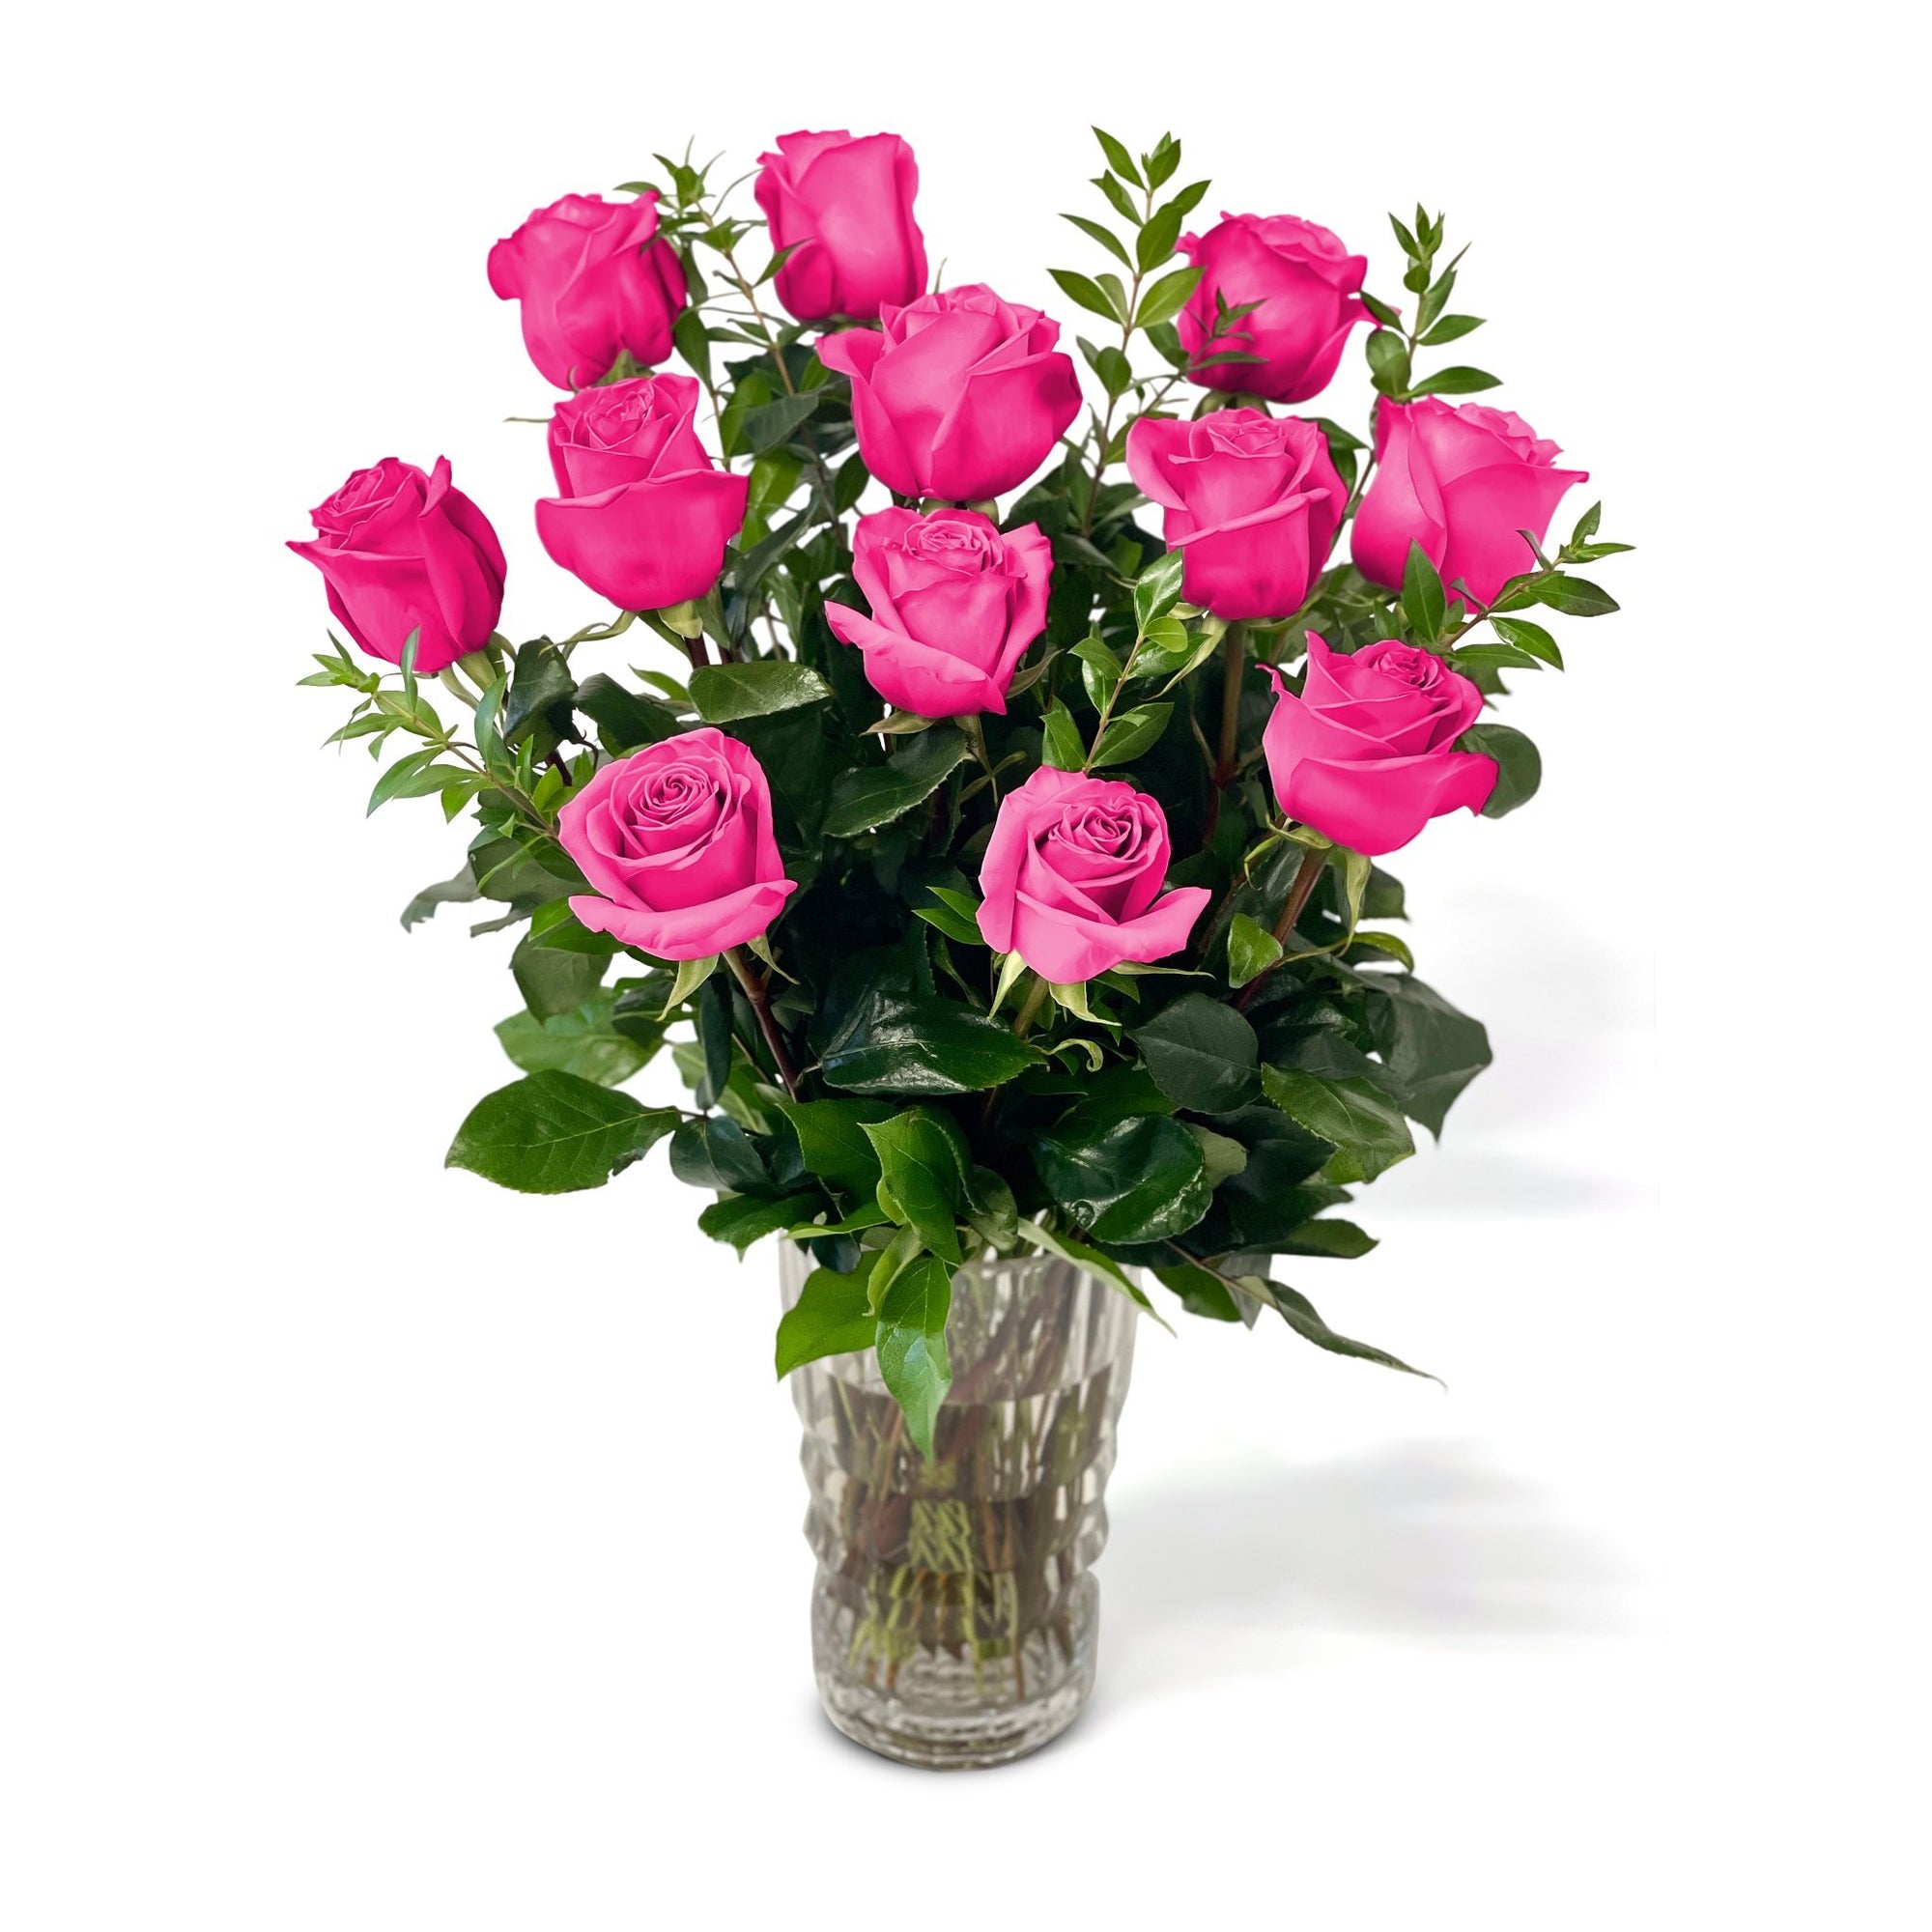 NYC Flower Delivery - Fresh Roses in a Crystal Vase | Dozen Hot Pink - Roses